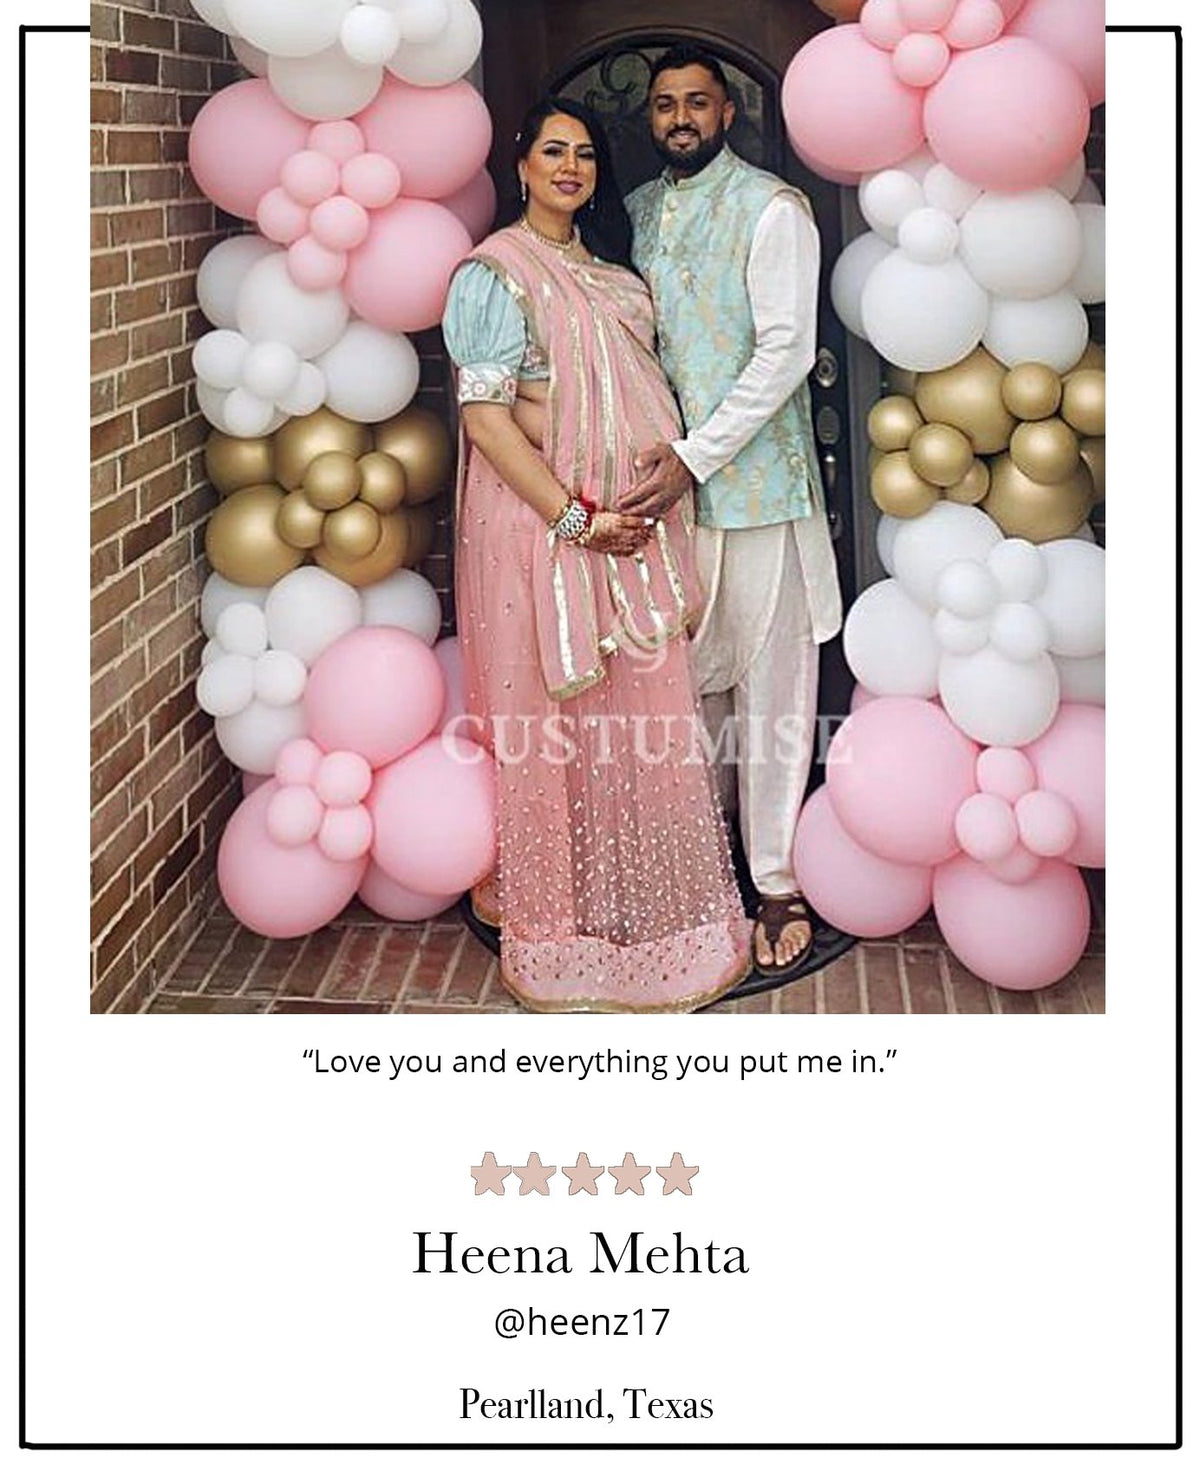 Our client Heena wearing custom made indian baby shower lehenga with coordinated outfit for her husband.